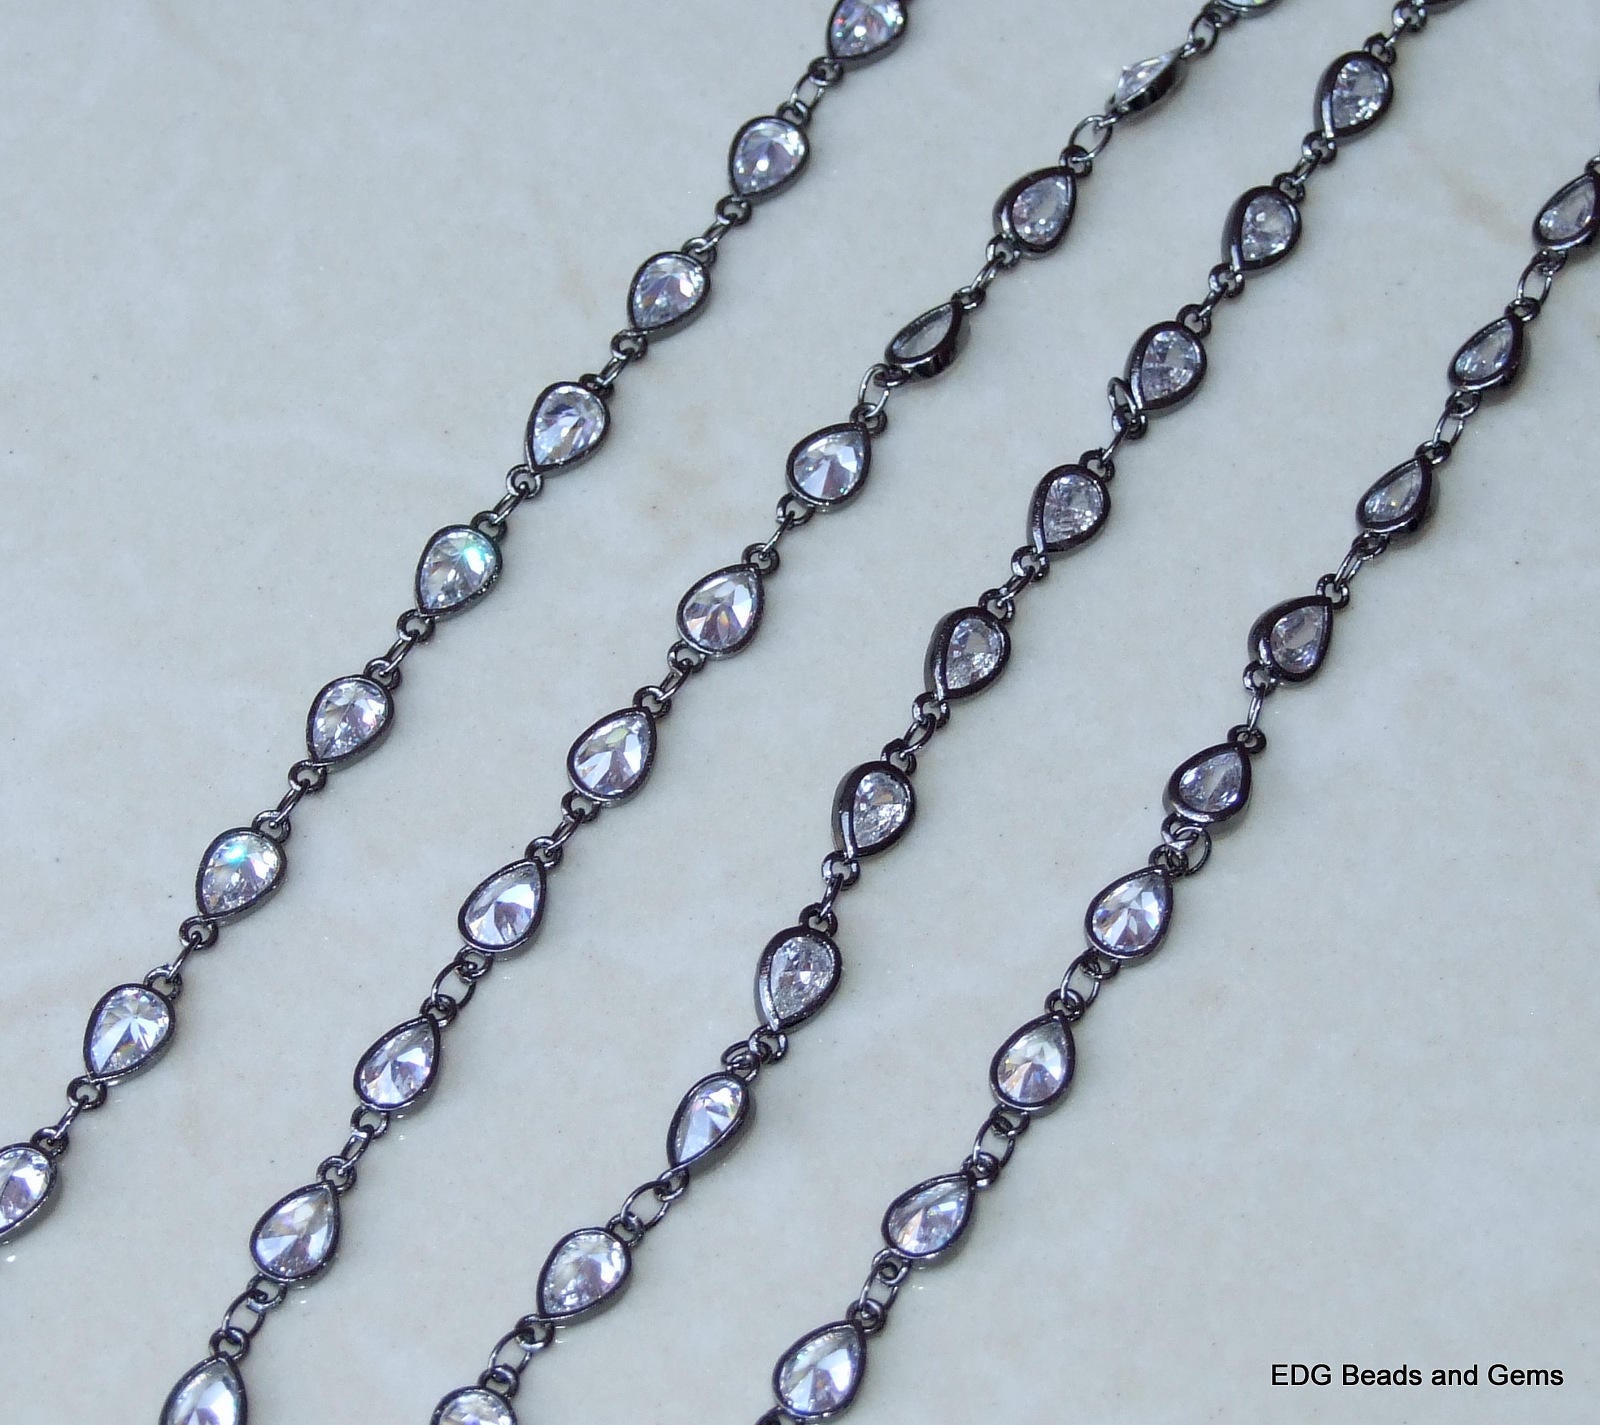 CZ Crystal Rosary Chain, Bulk Chain, Rectangle Glass Beads, Beaded Chain, Body Chain Jewelry, Gunmetal Chain, Necklace Chain, Belly Chain